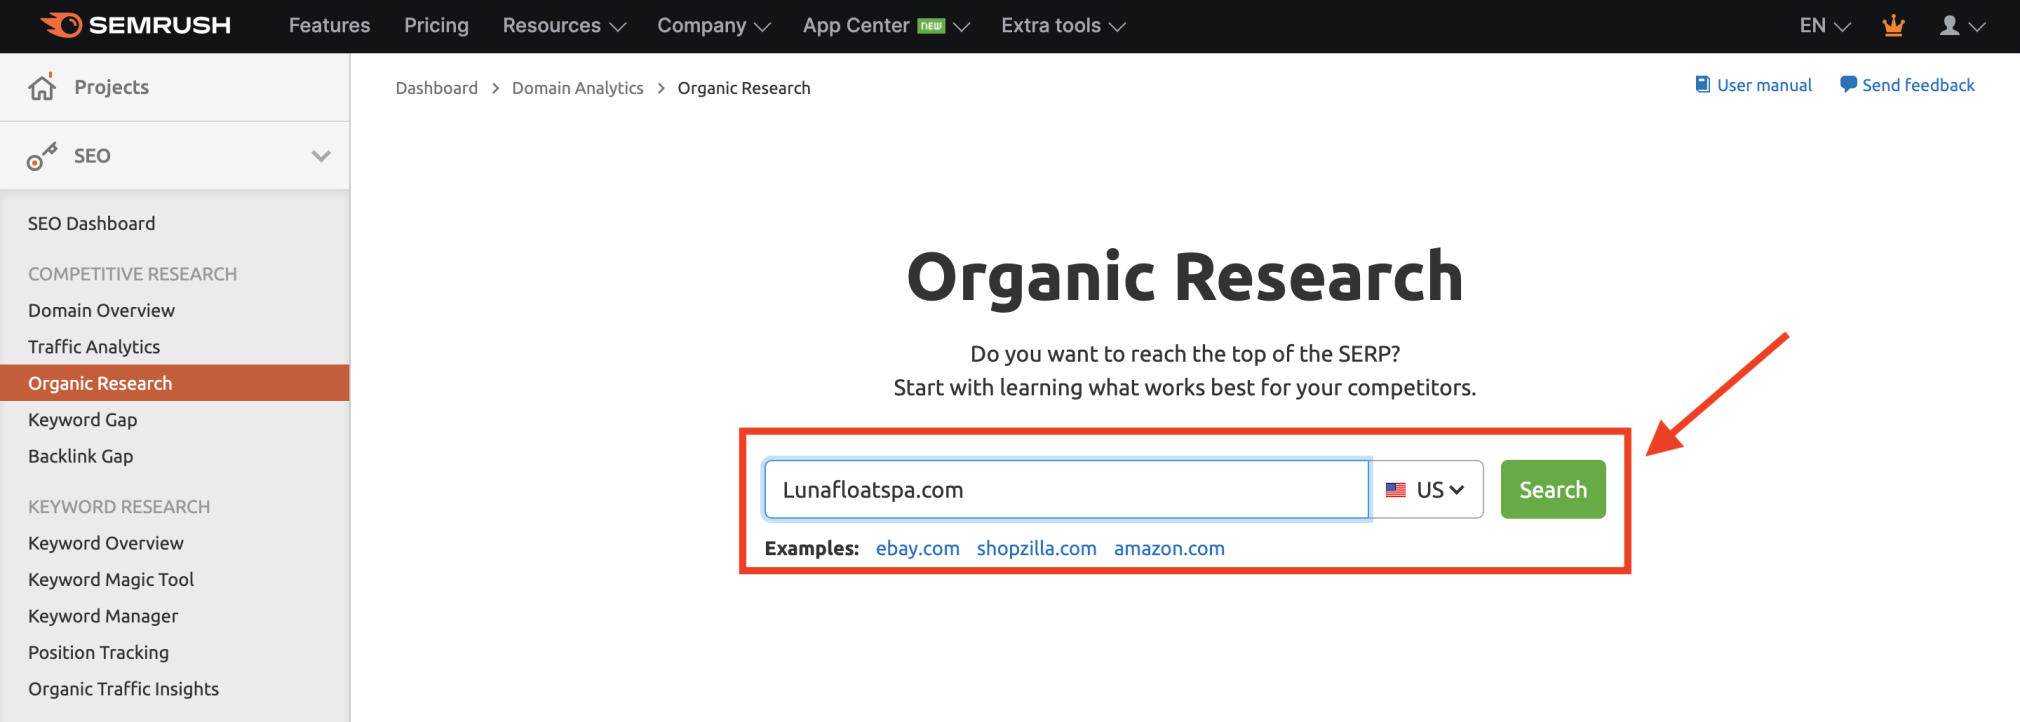 Organic Research tool example